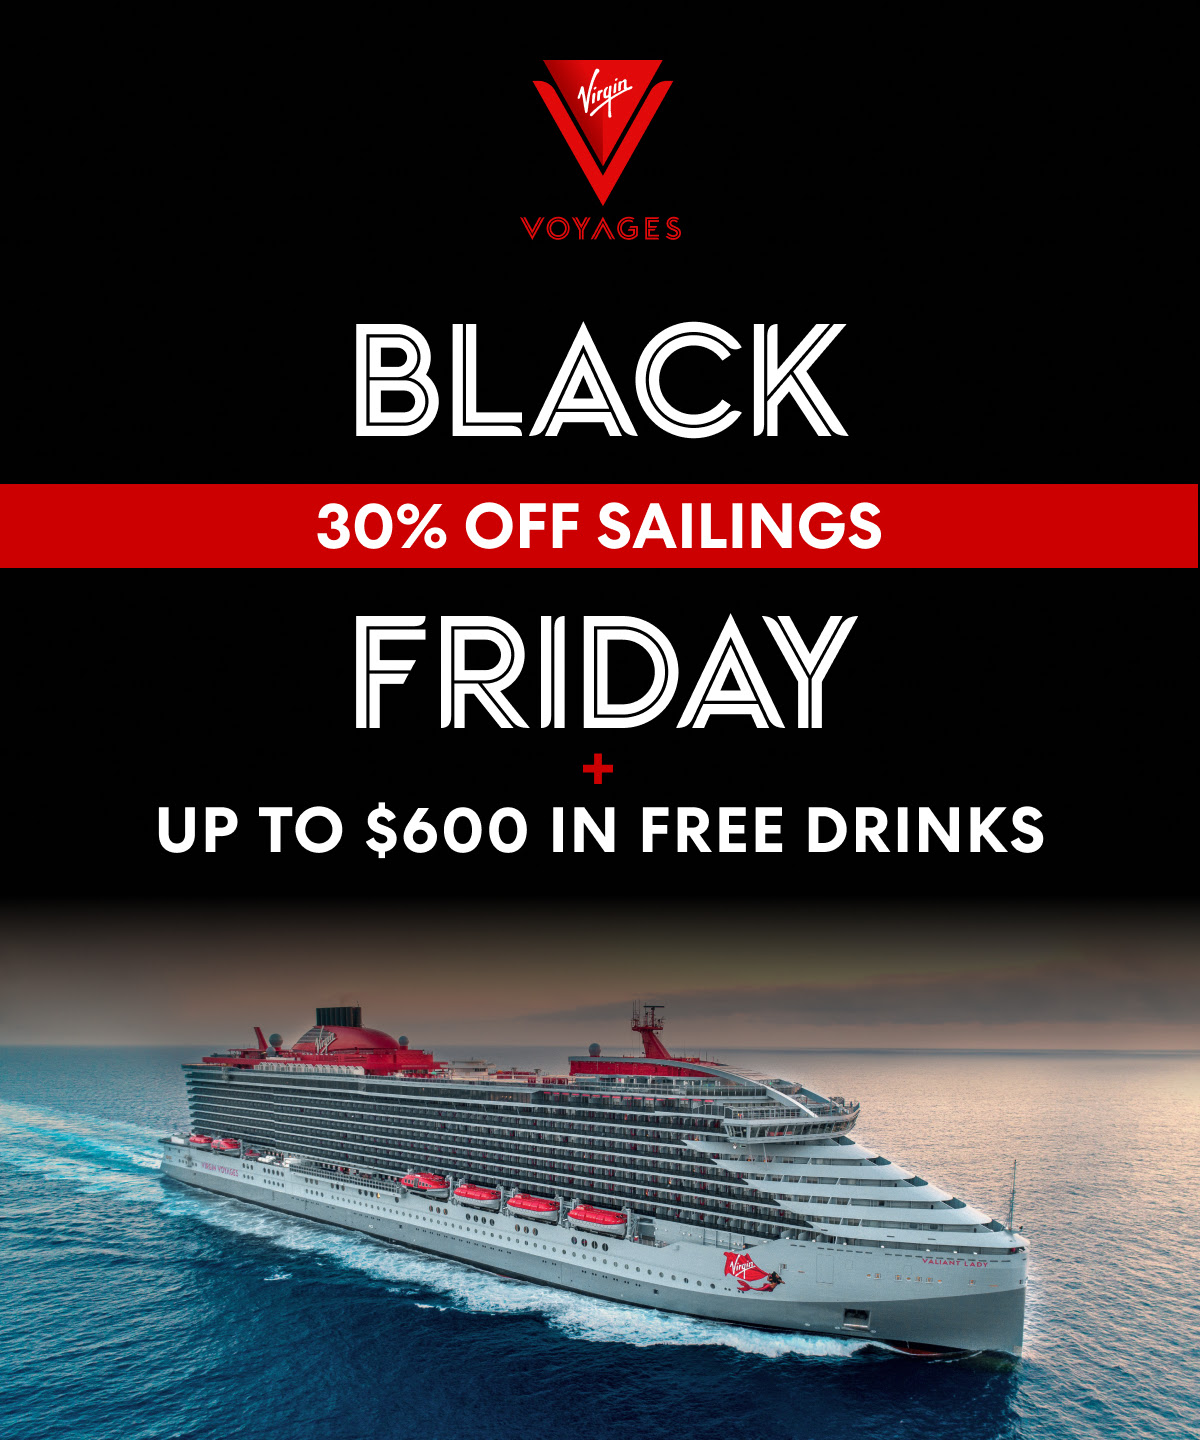 Book This Virgin Voyages’ Exclusive Black Friday Sale Now!